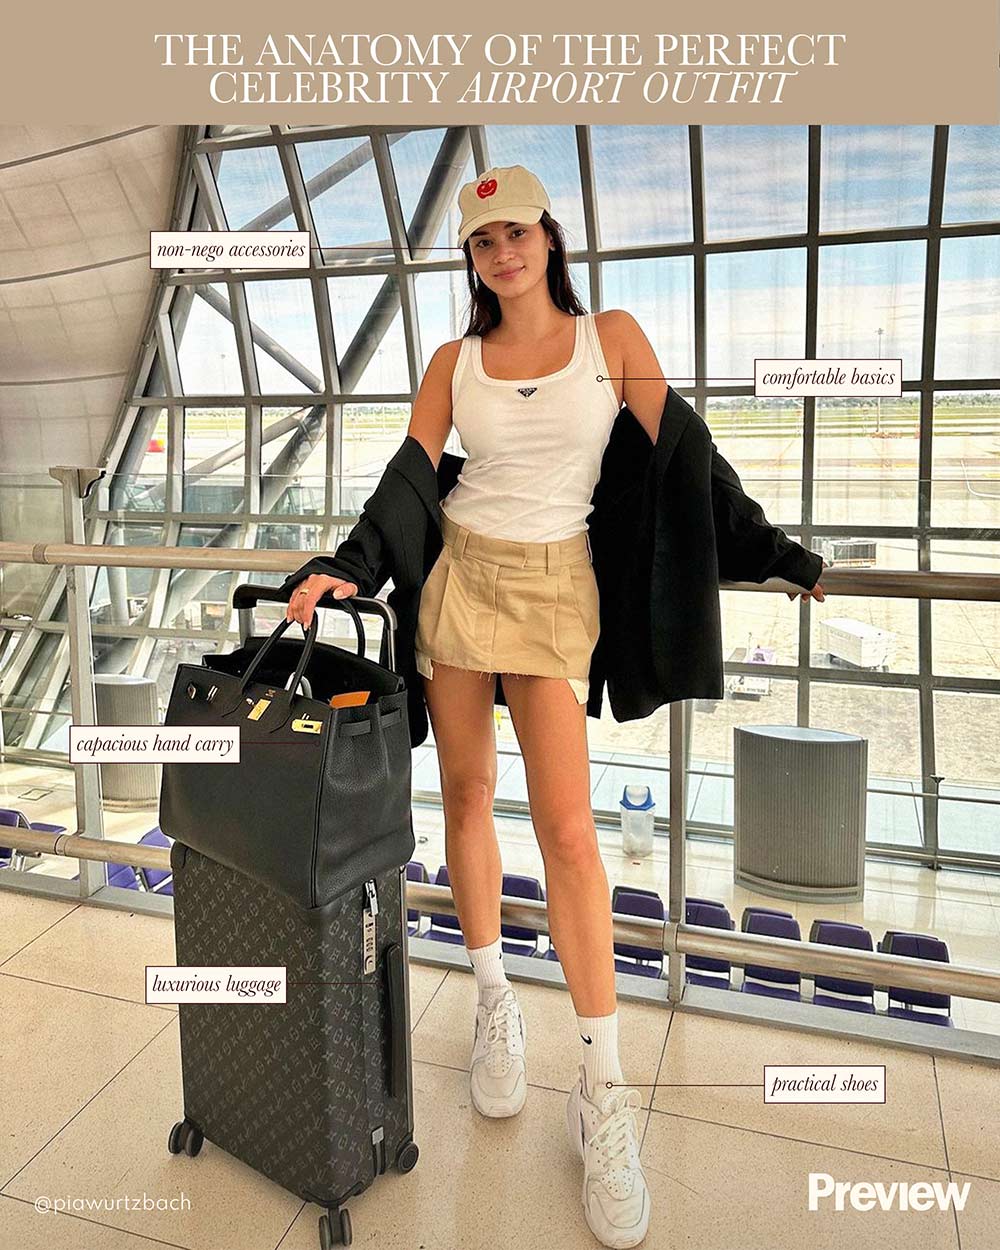 Stylish Women Have Brought One Thing to the Airport for Decades  Louis  vuitton duffle bag, Louis vuitton, Celebrity airport style